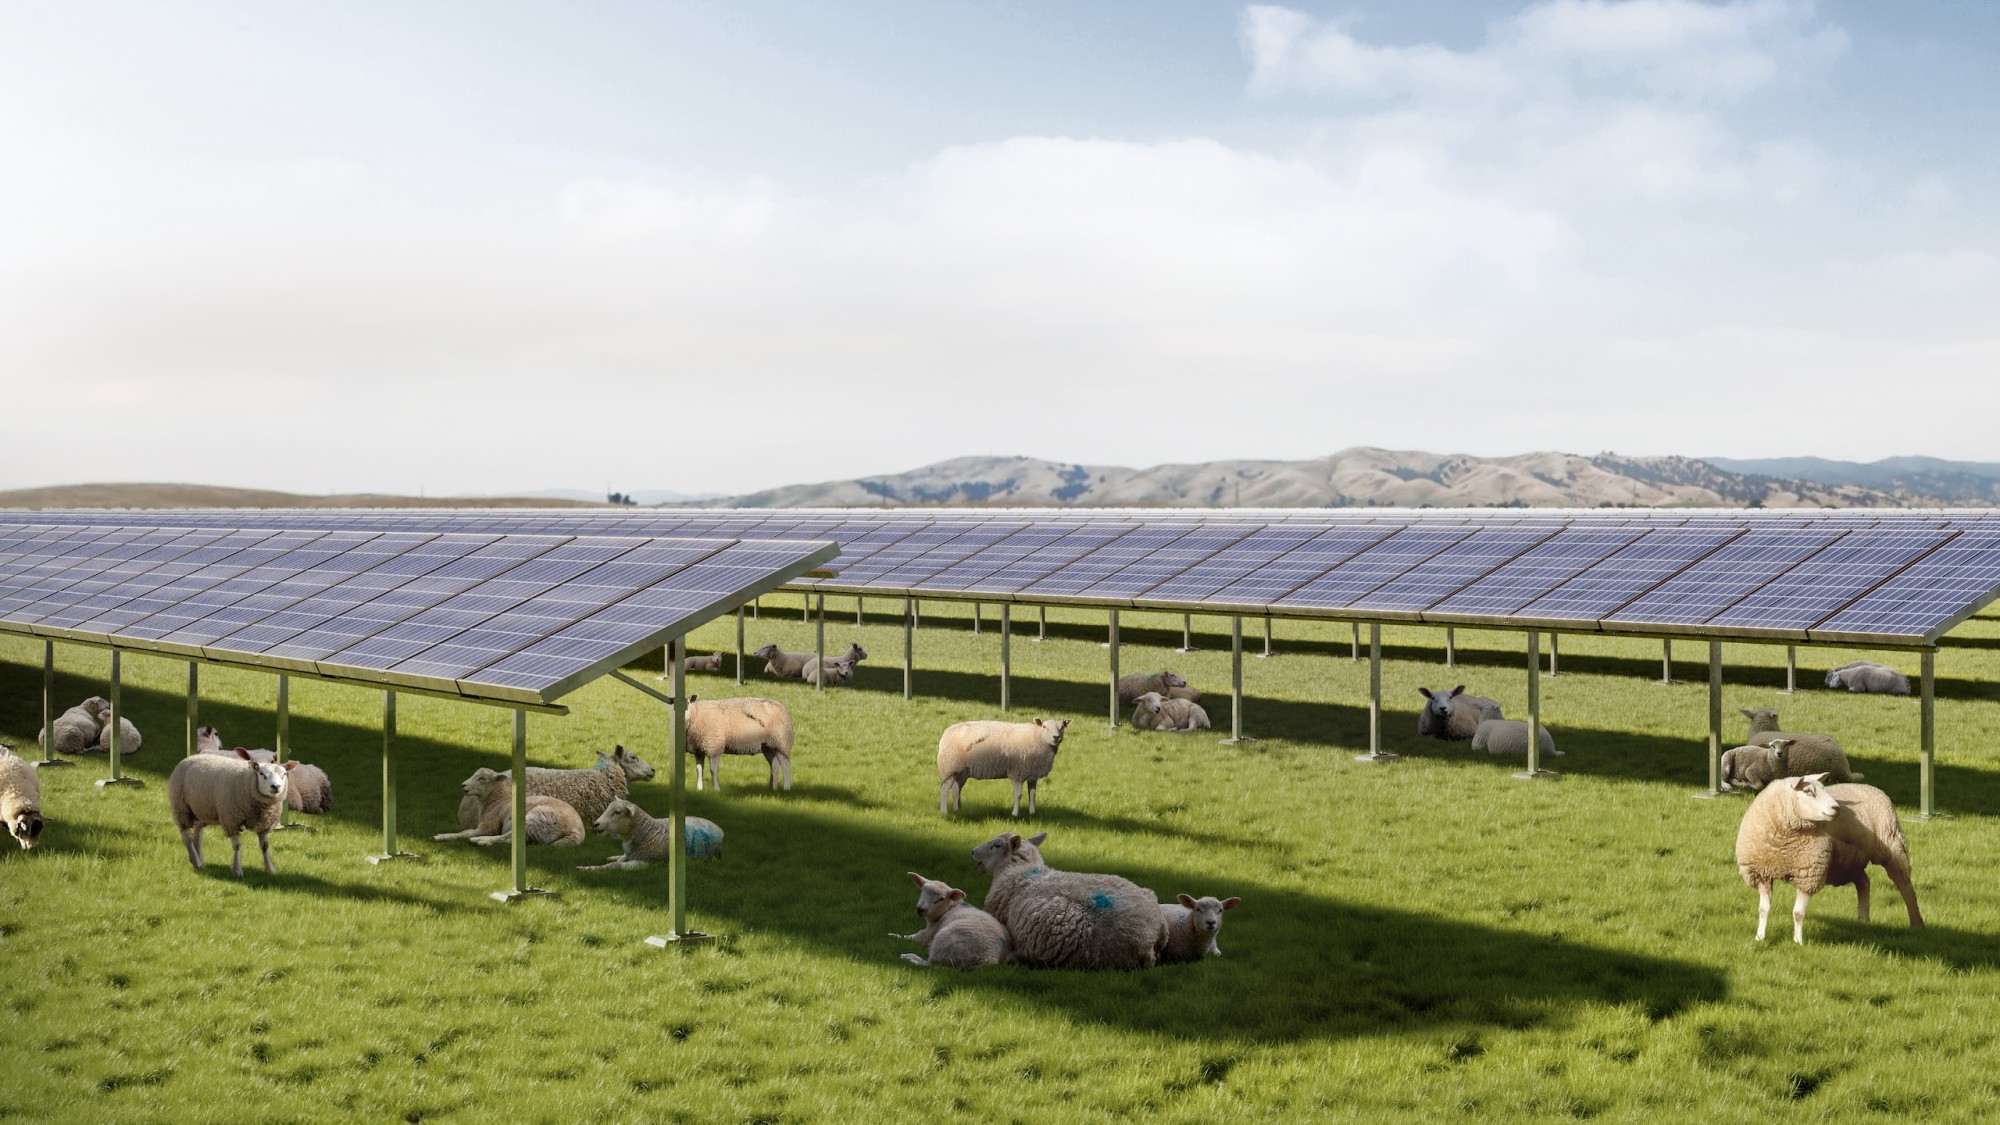 Collaborating with UC Davis on research into combining solar farms with agriculture and habitat conservation